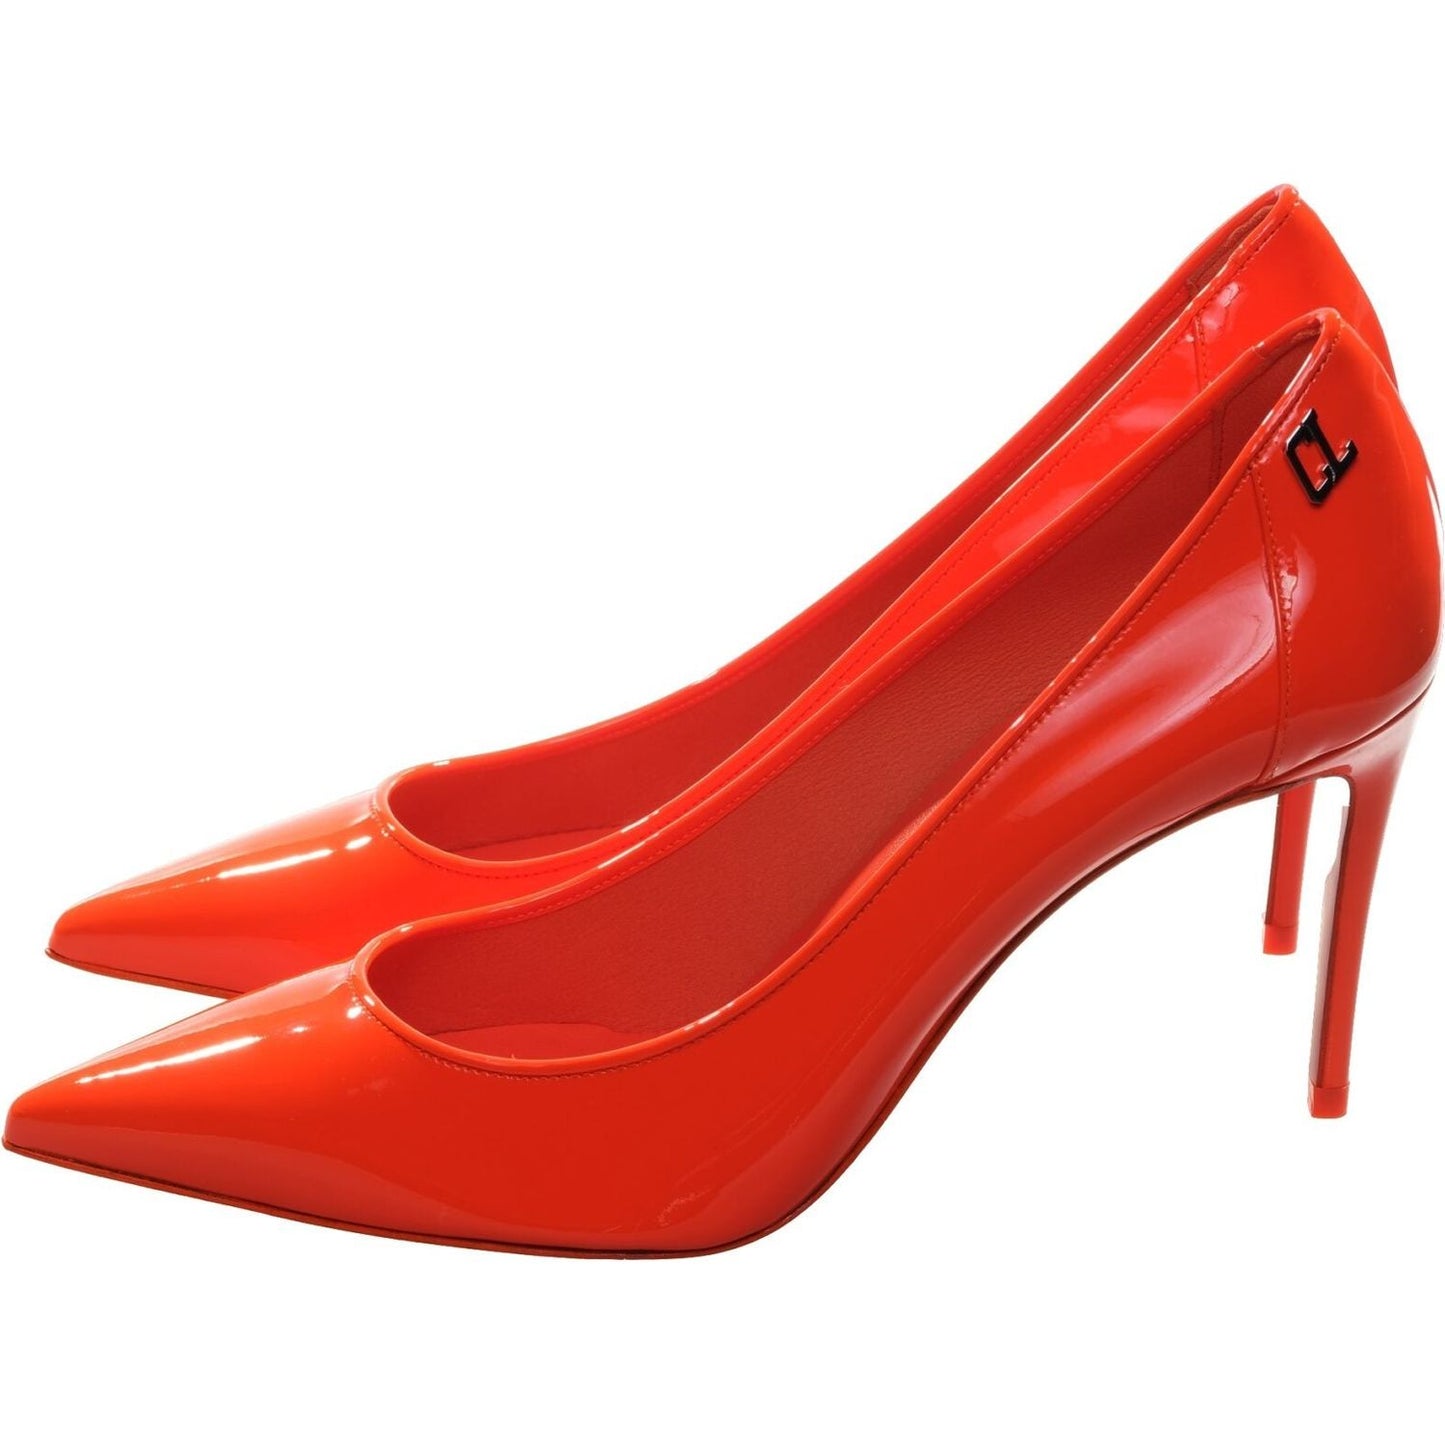 Sporty Kate Orange Patent Leather High Heel Pumps